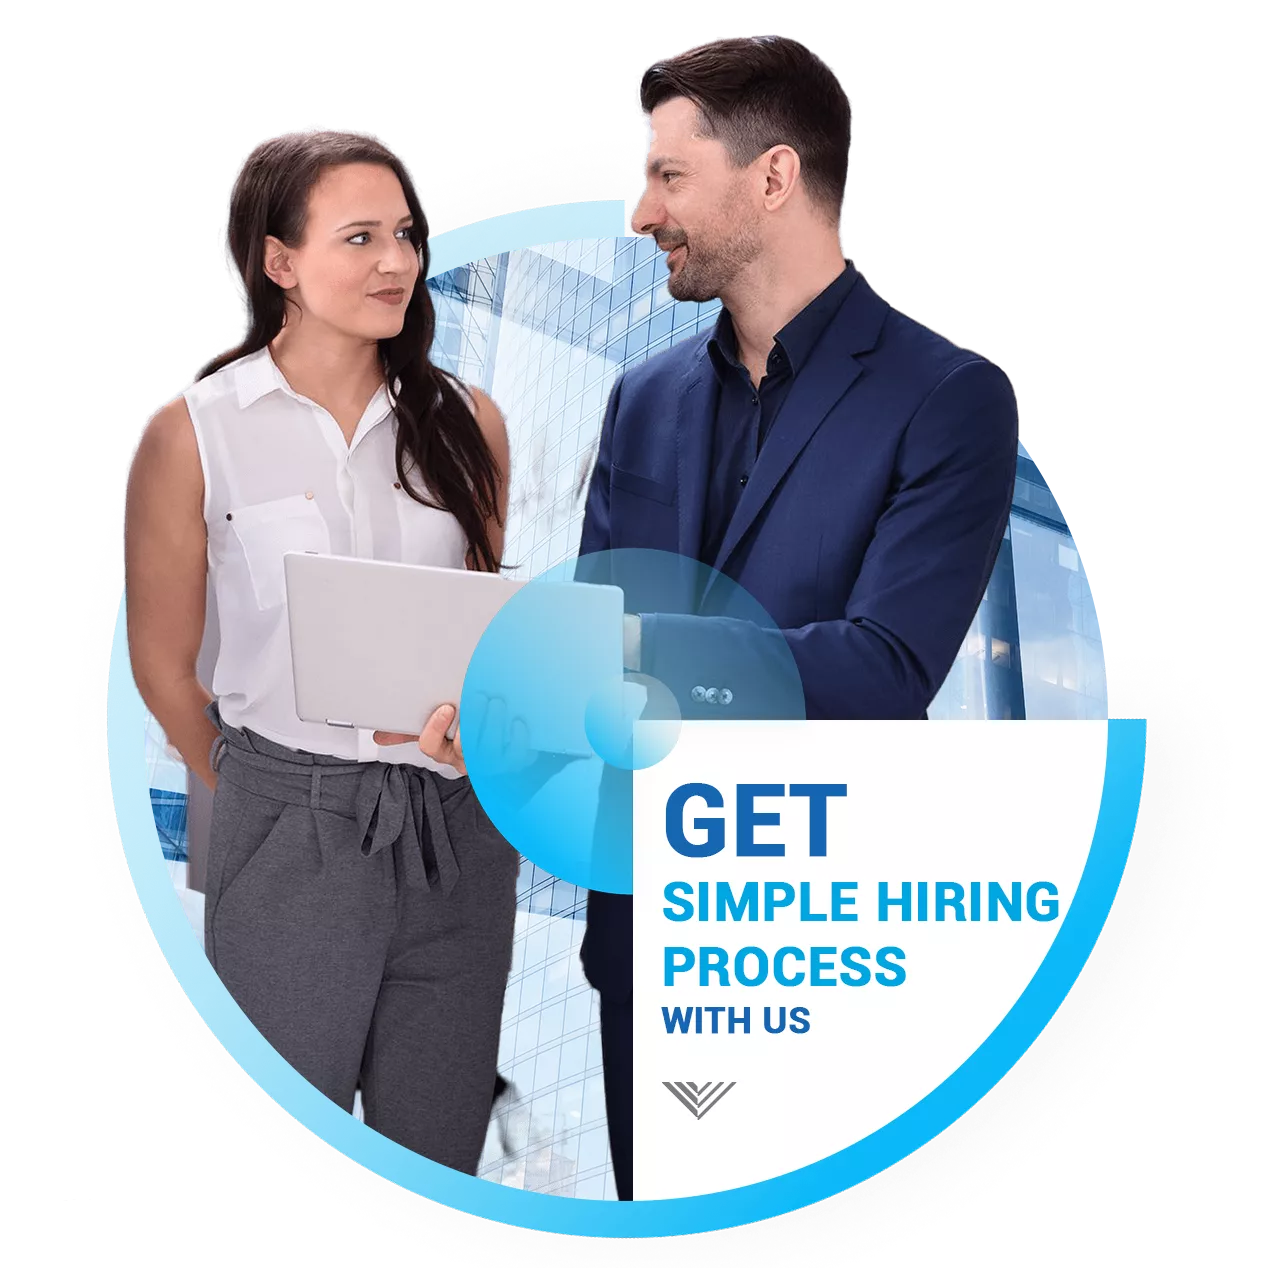 Get Simple Hiring Process with Us with PEO